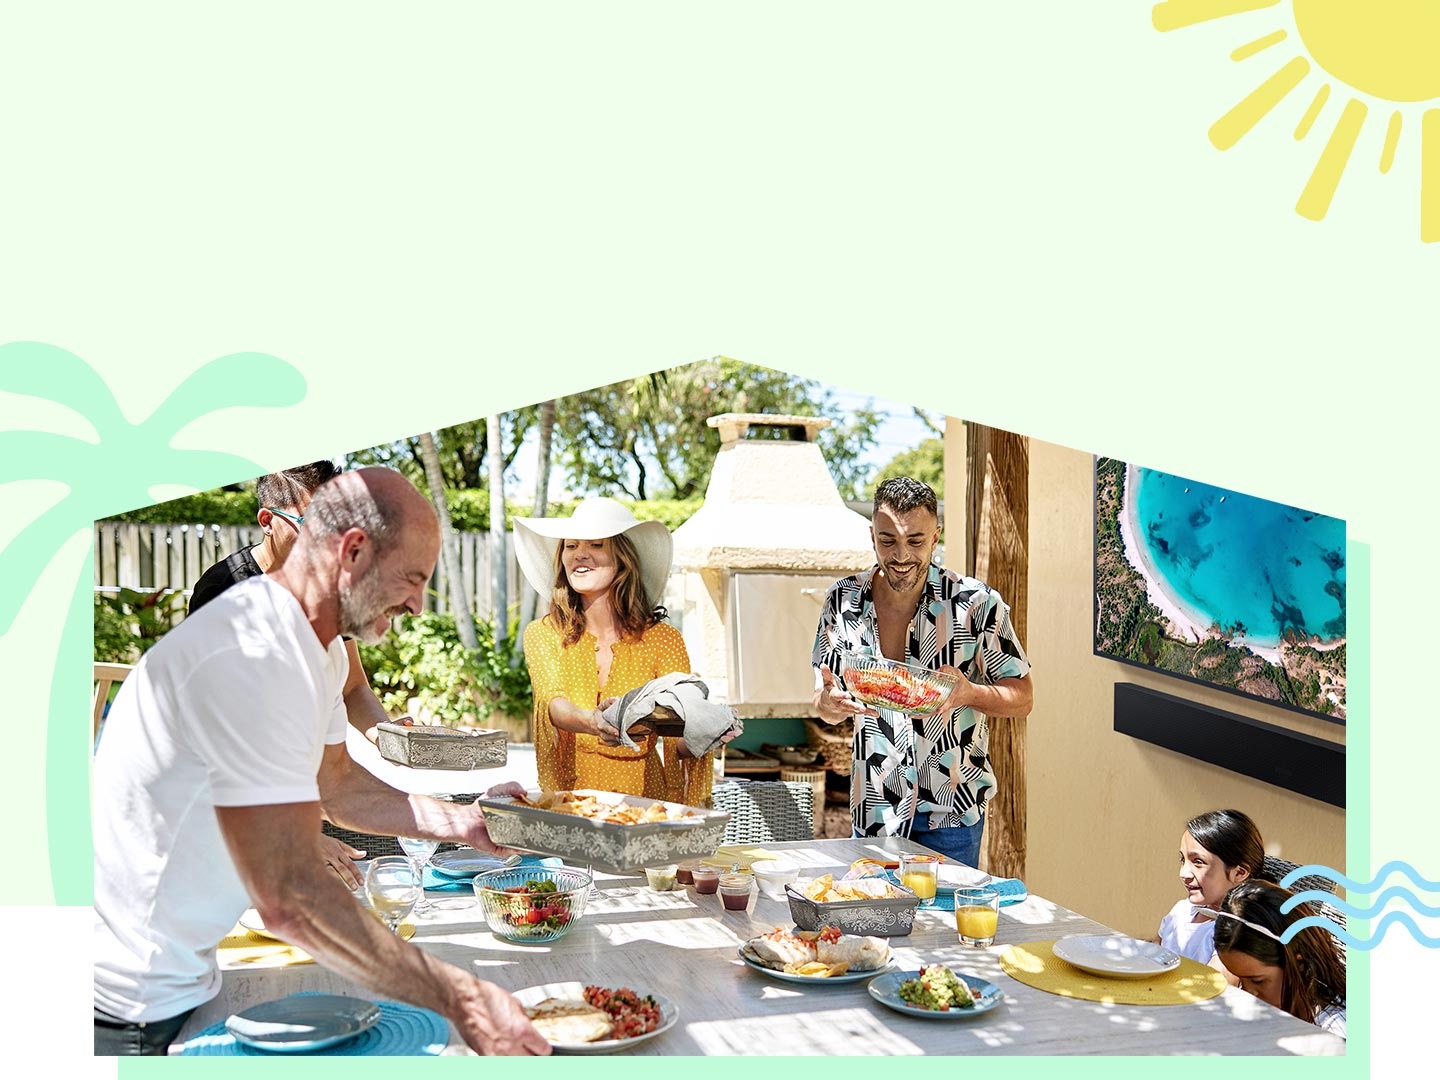 Family members enjoy the summery weather and set up a table with food out under a large gazebo in the yard. The Terrace and Soundbar play an entertaining video in the background.